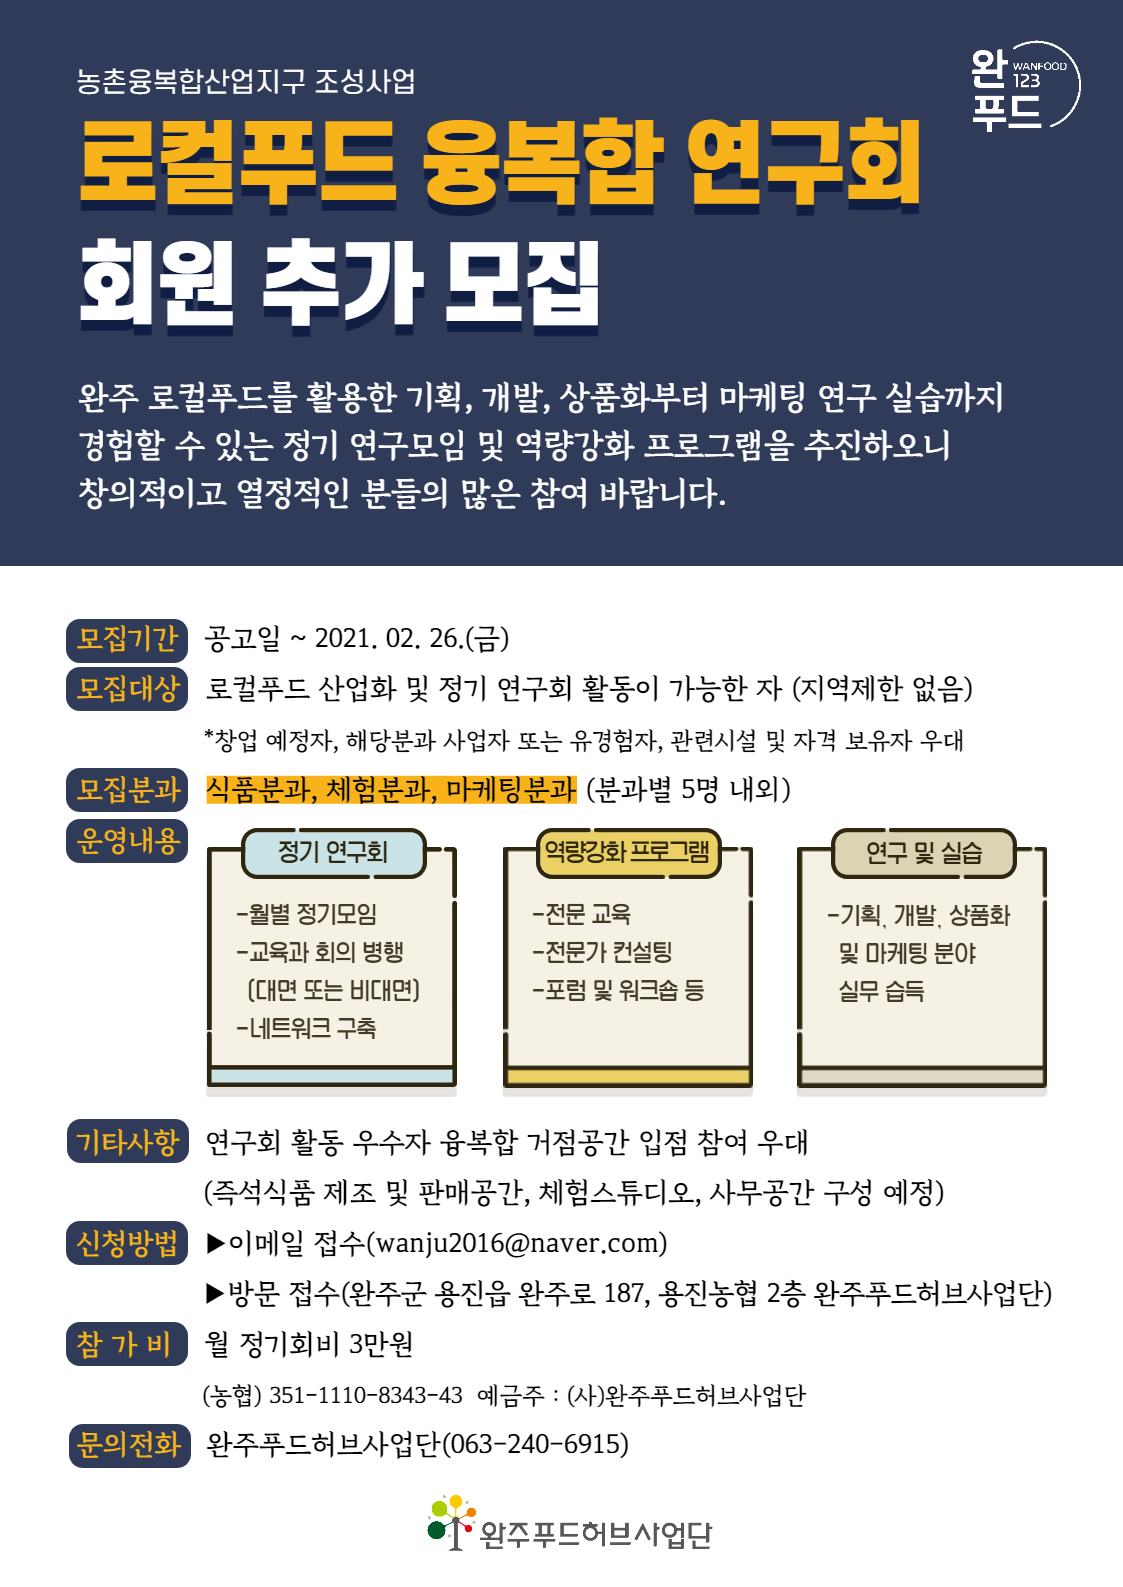 &#47196;&#52972;&#54392;&#46300;&#50997;&#48373;&#54633;&#50672;&#44396;&#54924;&#54924;&#50896;&#52628;&#44032;&#47784;&#51665;(&#54252;&#49828;&#53552;).png